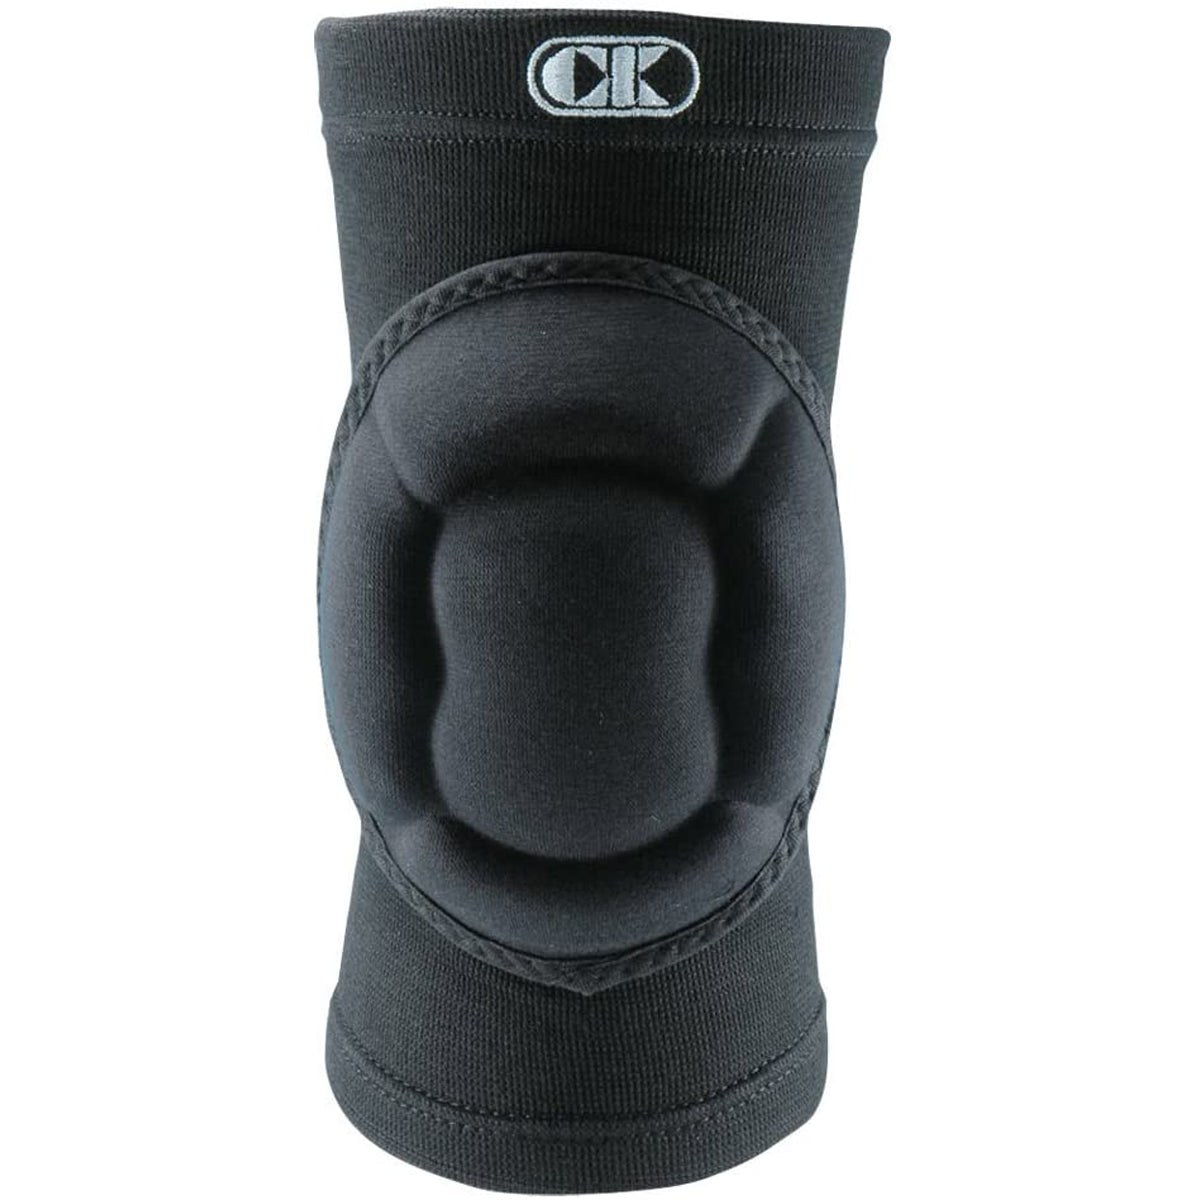 Cliff Keen The Impact Youth Knee Pad - Black Cliff Keen